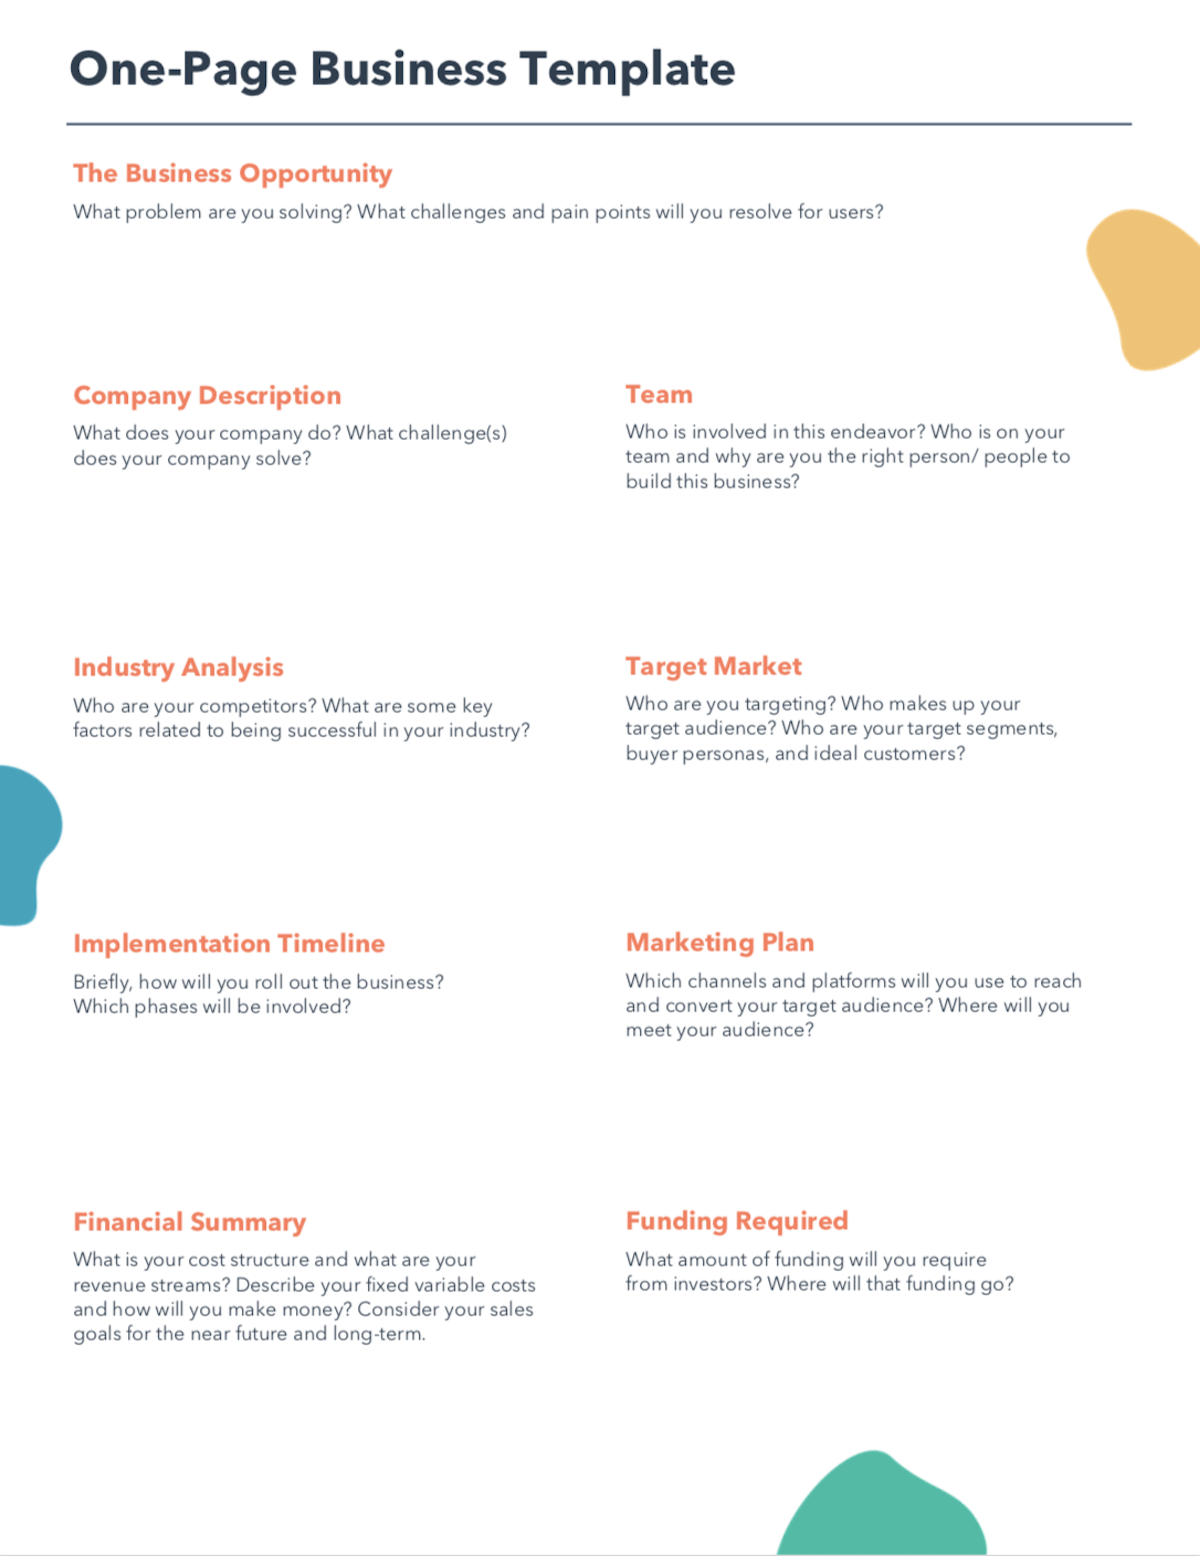 Free One Page Business Plan Template for PDF  Word  HubSpot With Regard To One Page Business Plan Template Word